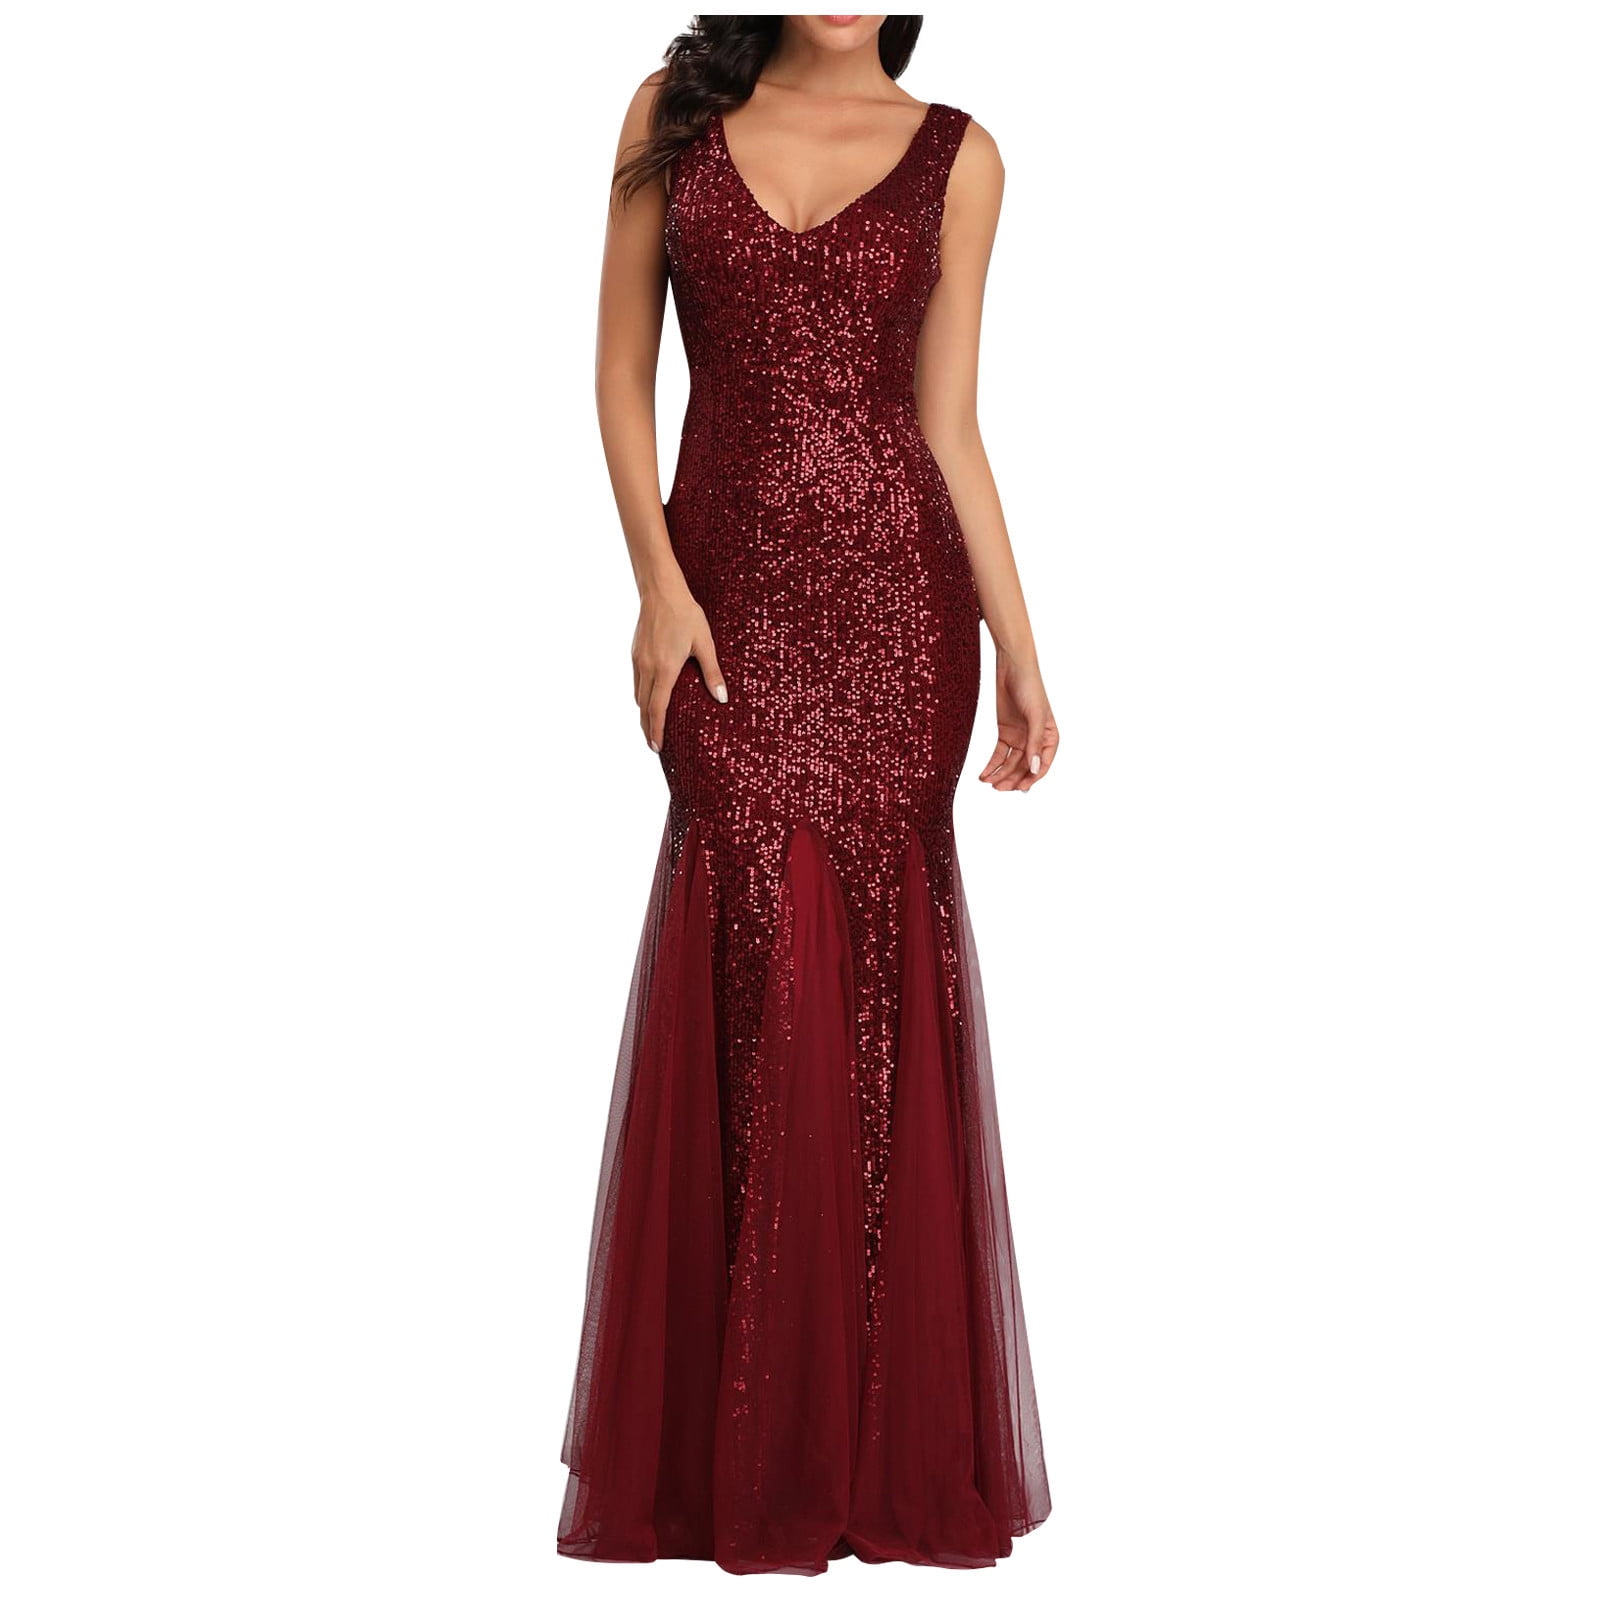 QUYUON Womens Party Evening Maxi Dress Sequins Fishtail Dress Evening ...